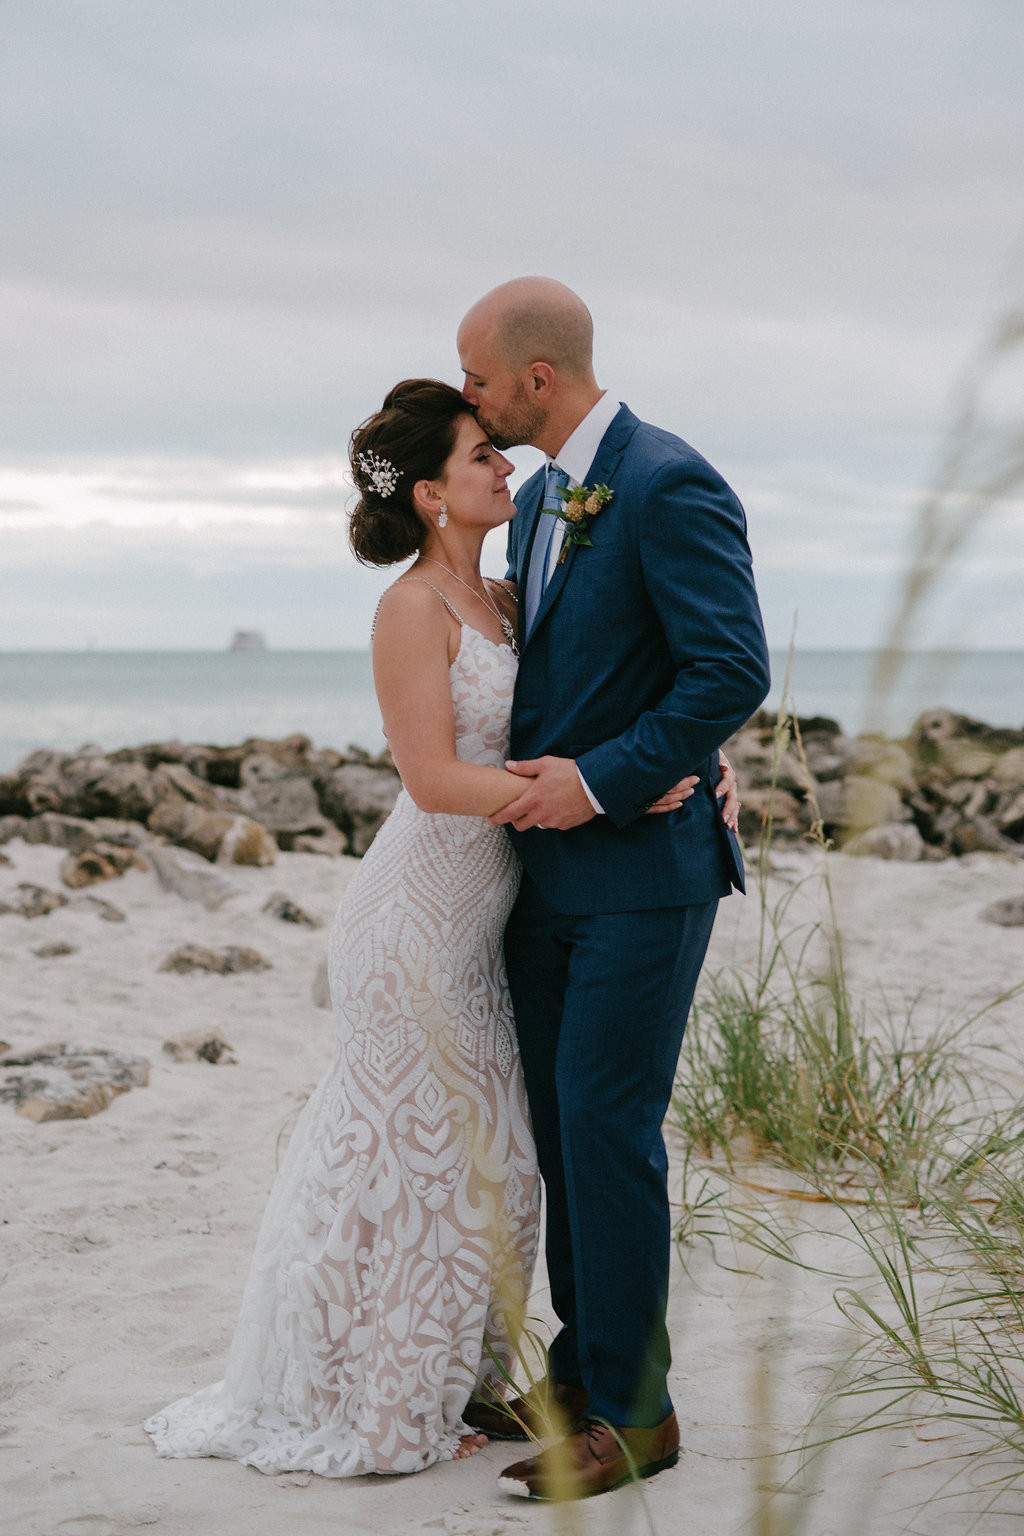 Destination Clearwater Beach Bride and Groom Intimate Romantic Wedding Portrait | Tampa Bay Photographer Grind and Press Photography | Hair and Makeup Michele Renee the Studio | Planner Special Moments Event Planning